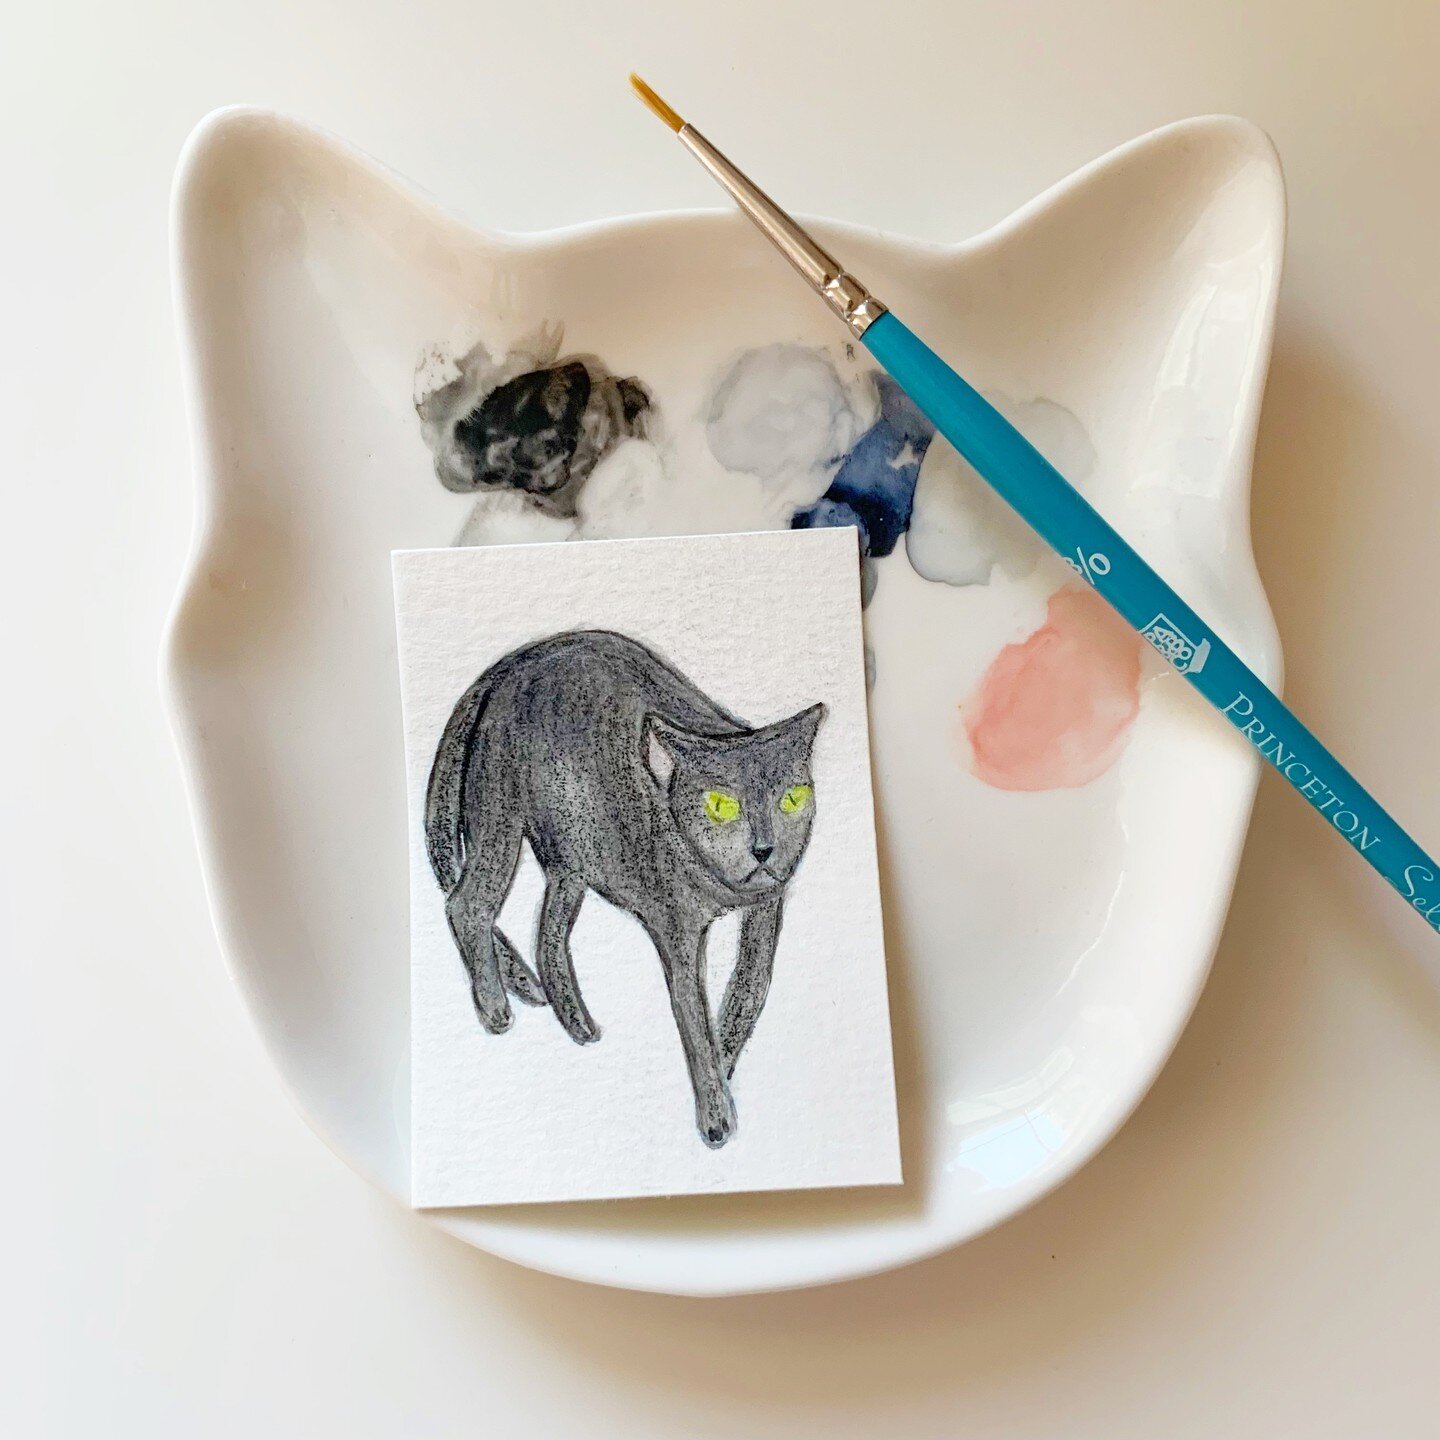 We might still be enjoying the tail end of summer but that doesn&rsquo;t mean we can&rsquo;t get excited for spooky season! 🔮

We made a little reminder that spooky season is almost here with this tiny painting of a cute and  spooky black cat. 🐈&zw